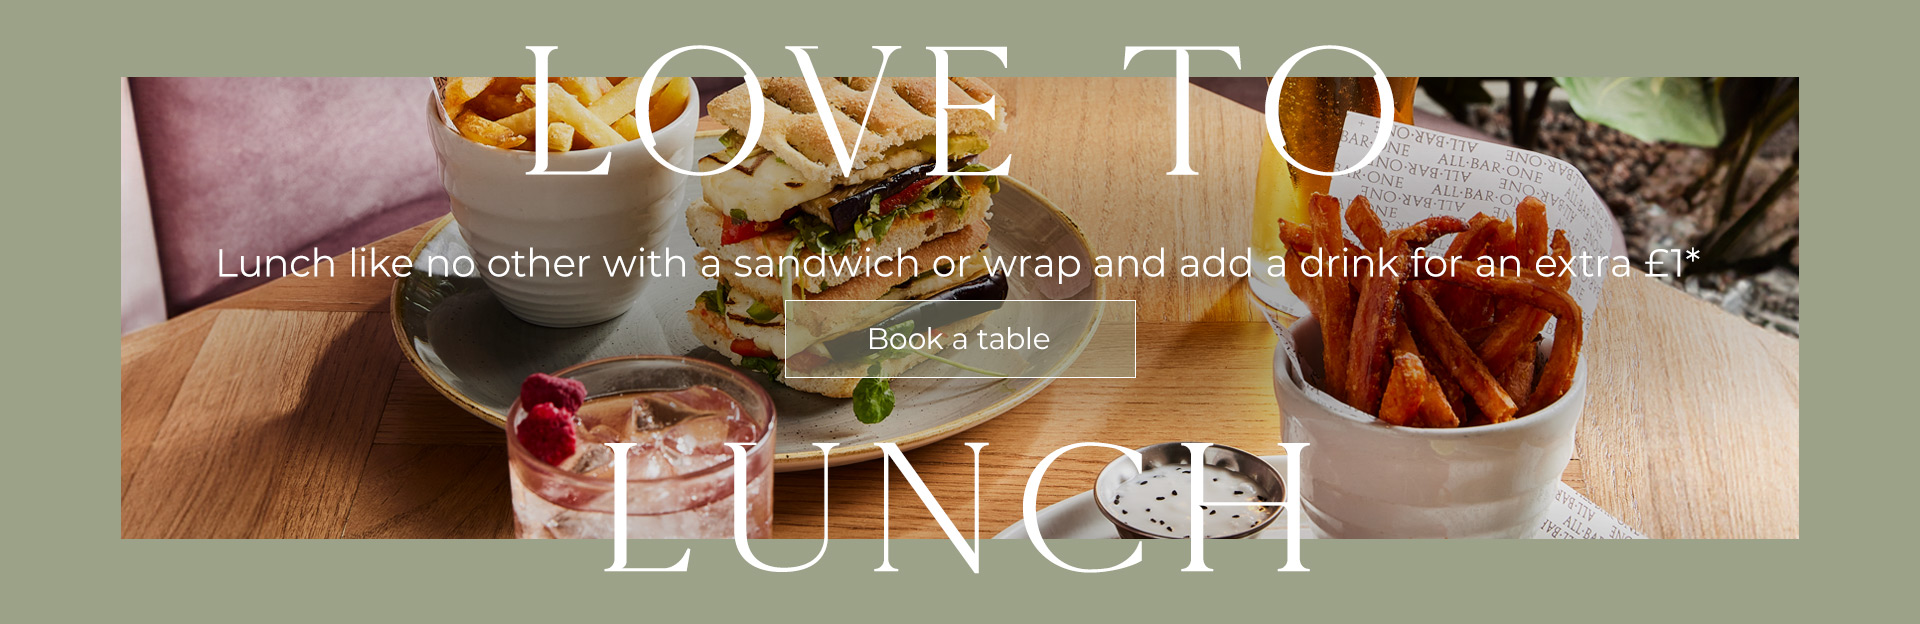 Lunch Offer at All Bar One Regent Street